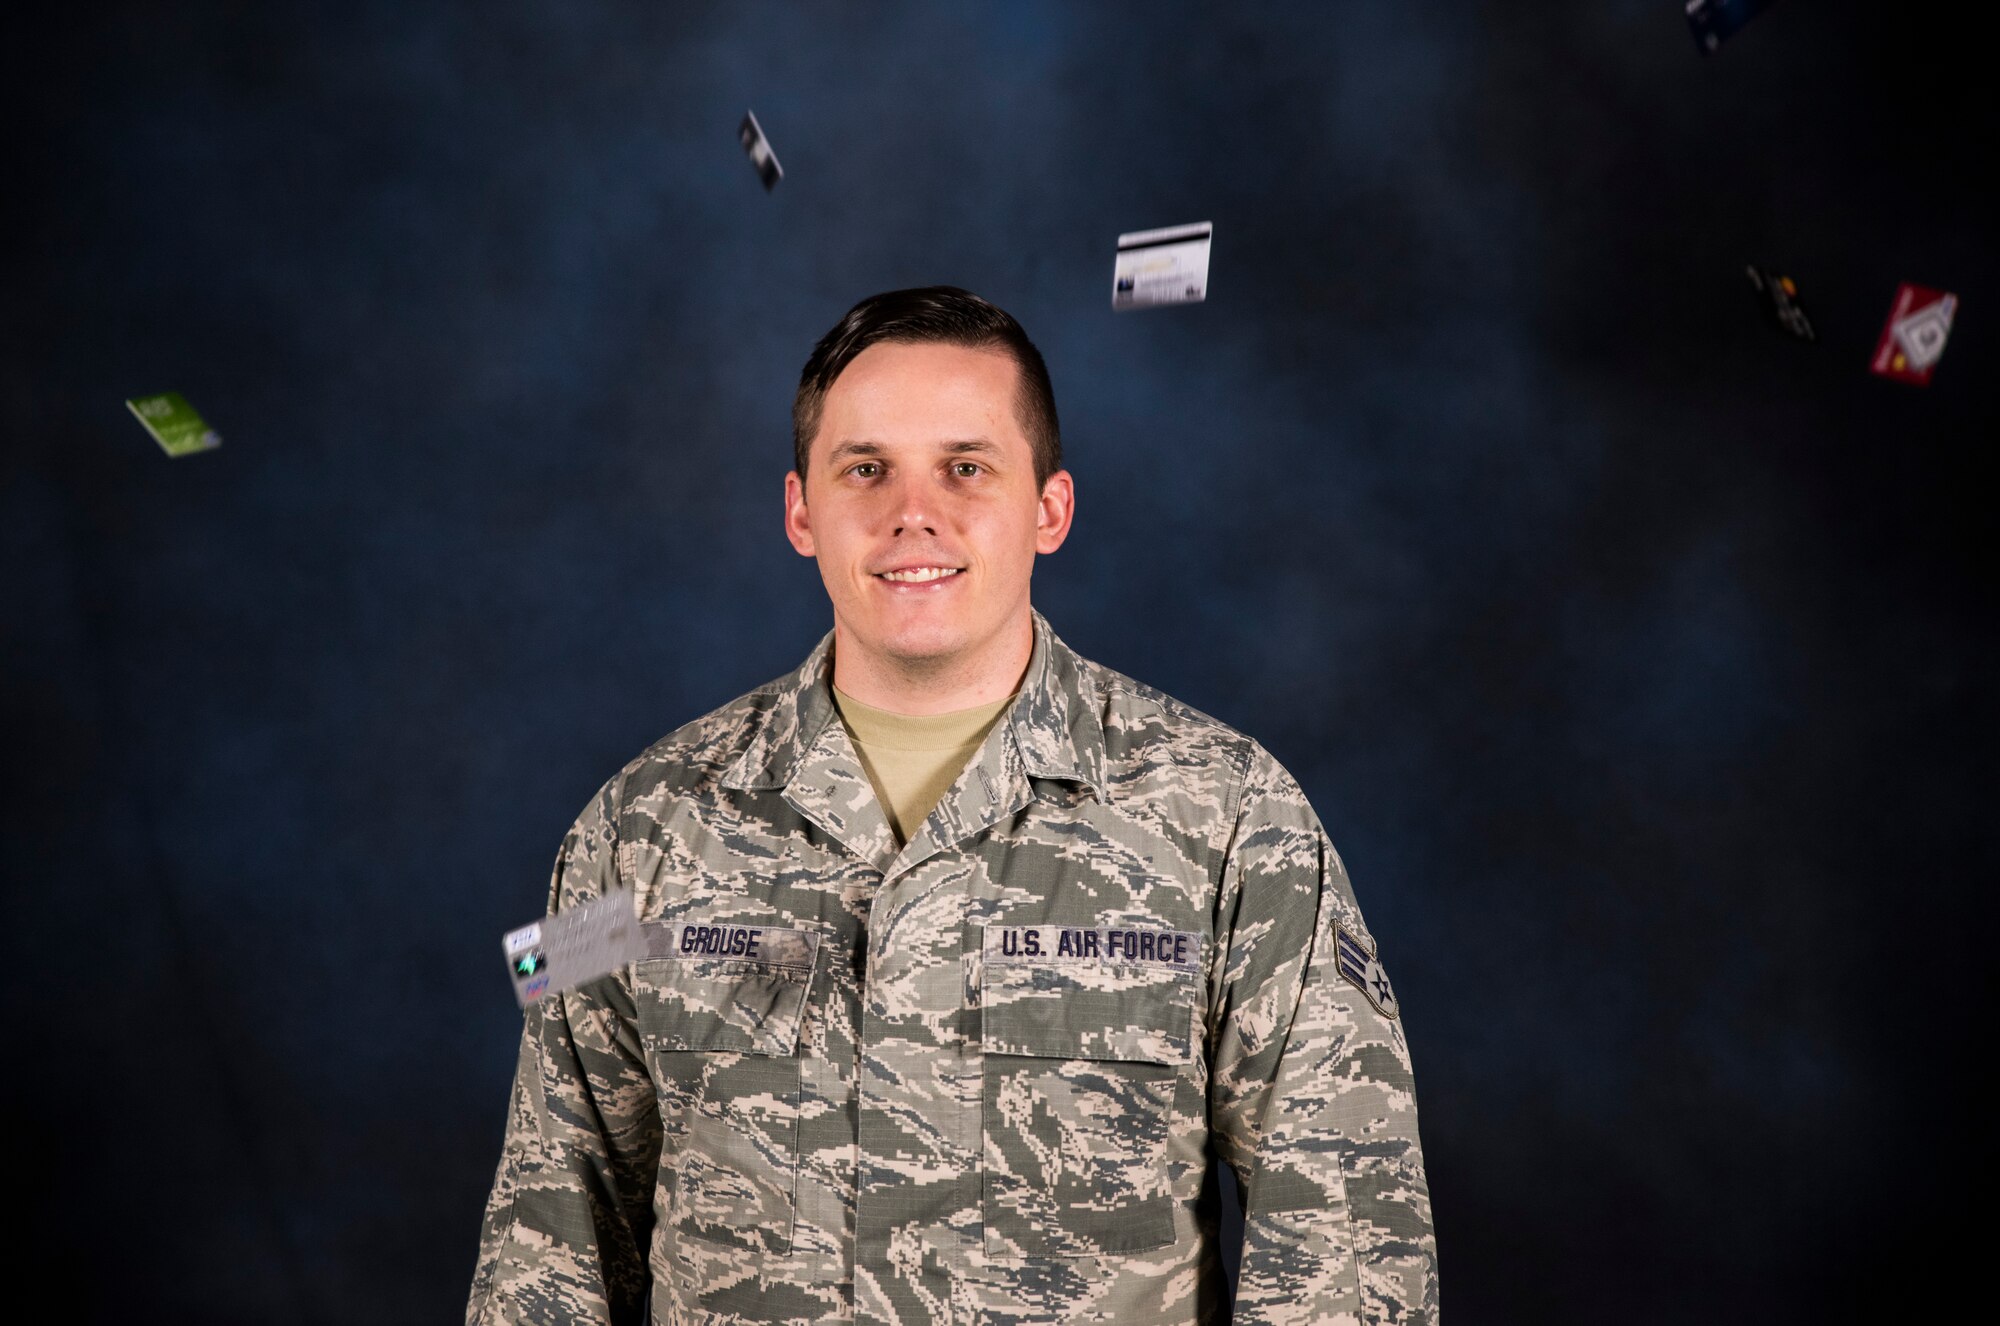 Senior Airman Chase Grouse, 188th Wing financial management technician, is selected for the October Flying Razorback Spotlight Oct. 12, 2016, at Ebbing Air National Guard Base, Fort Smith, Ark. Grouse joined the unit in 2009 and is working towards completing his Bachelor’s degree in finance and pursue commission opportunities. (U.S. Air National Guard photo by Senior Airman Cody Martin)